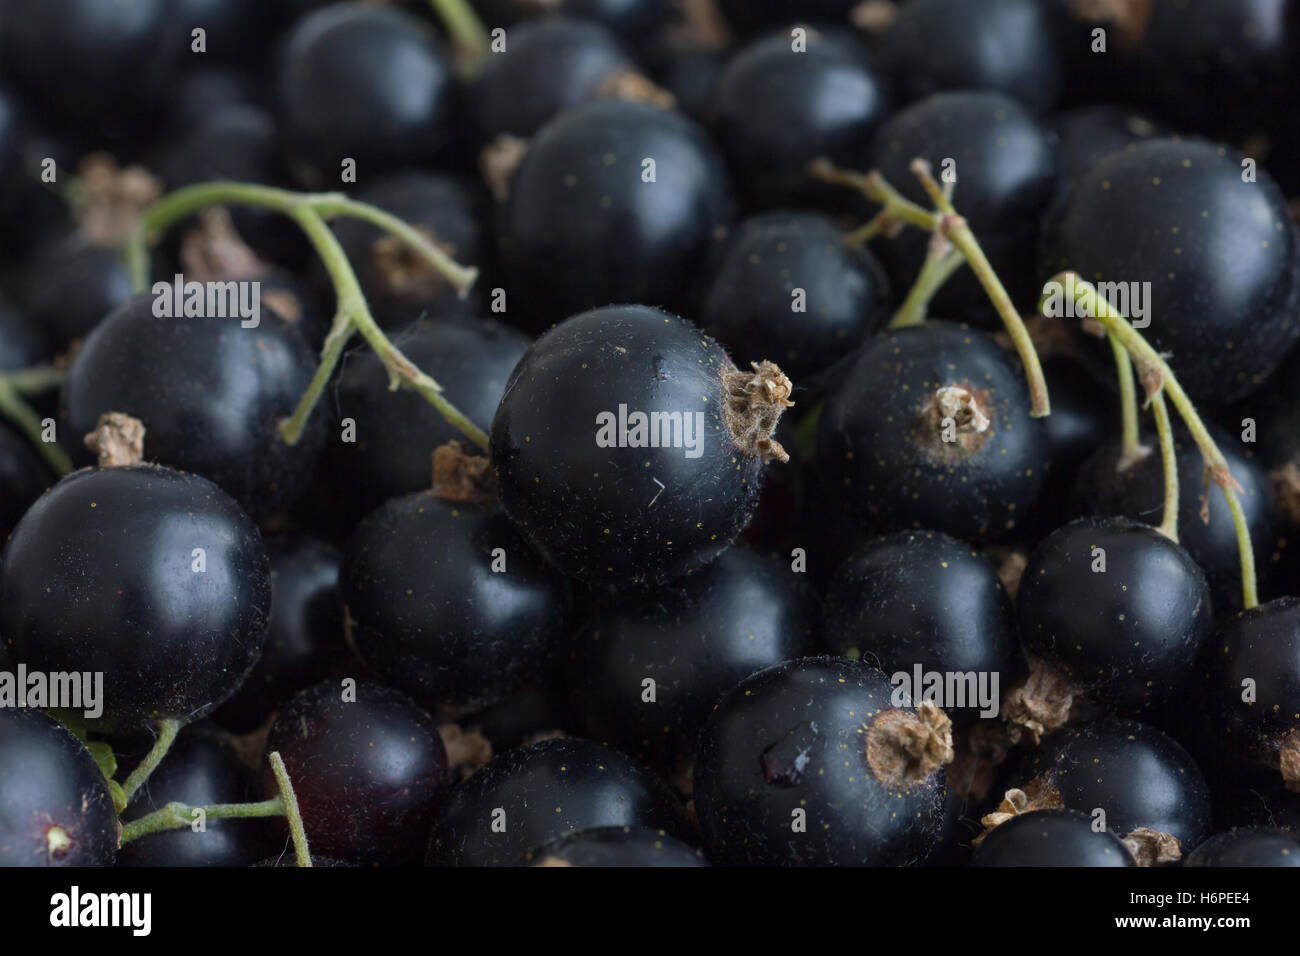 Freshly picked unwashed black currants with stems. Stock Photo